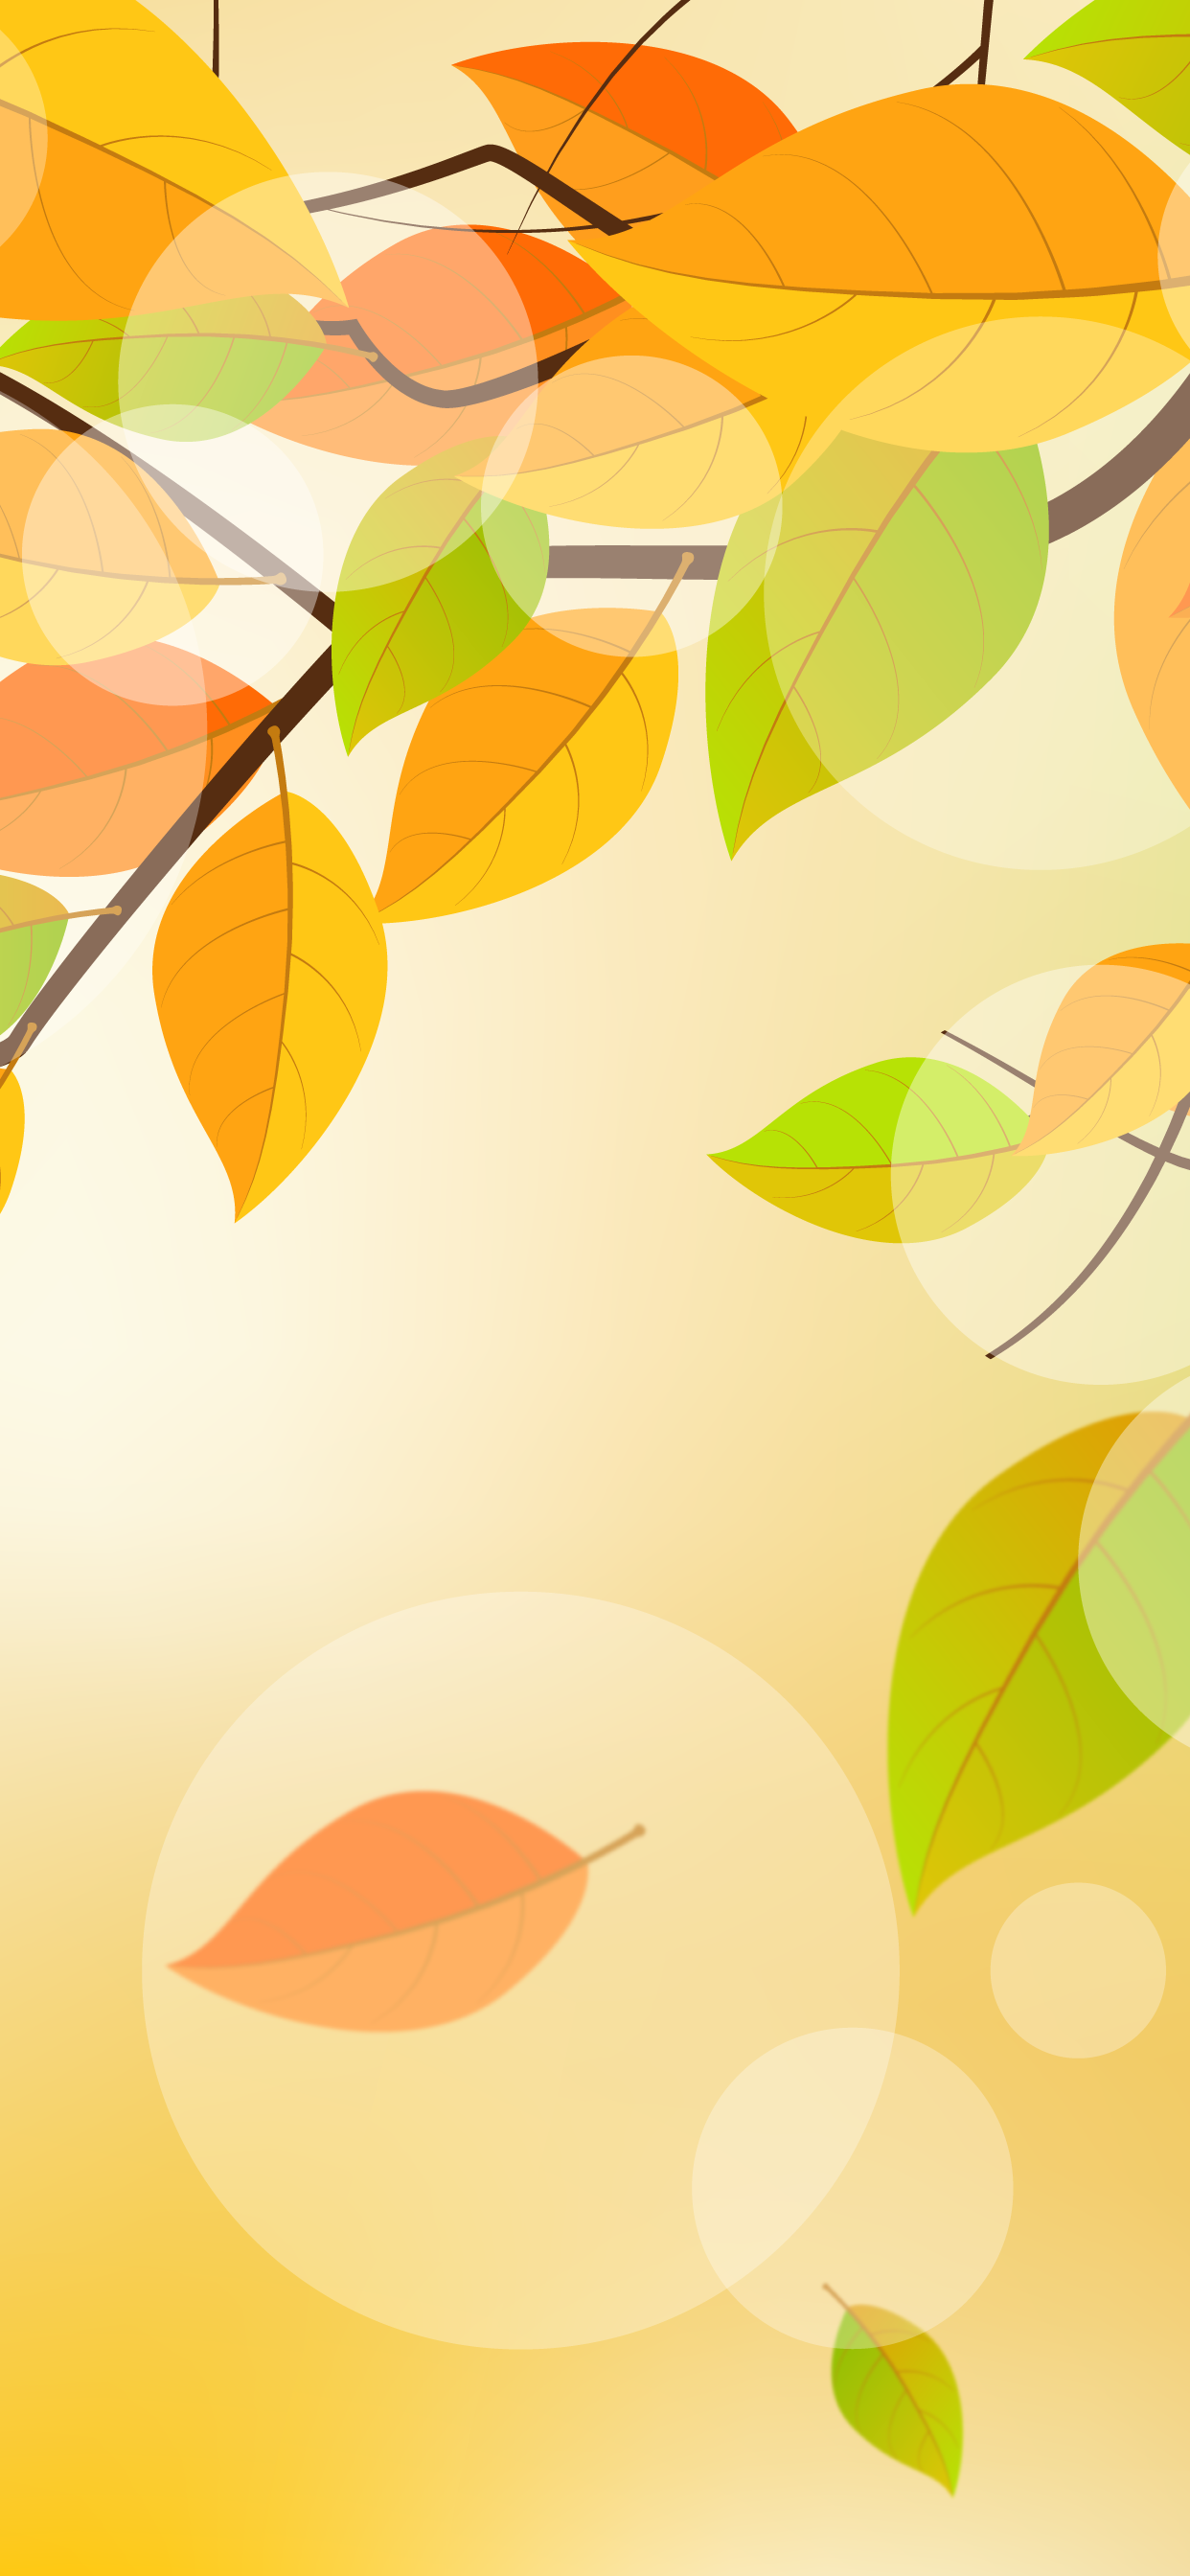 Autumn wallpaper for iPhone and iPad